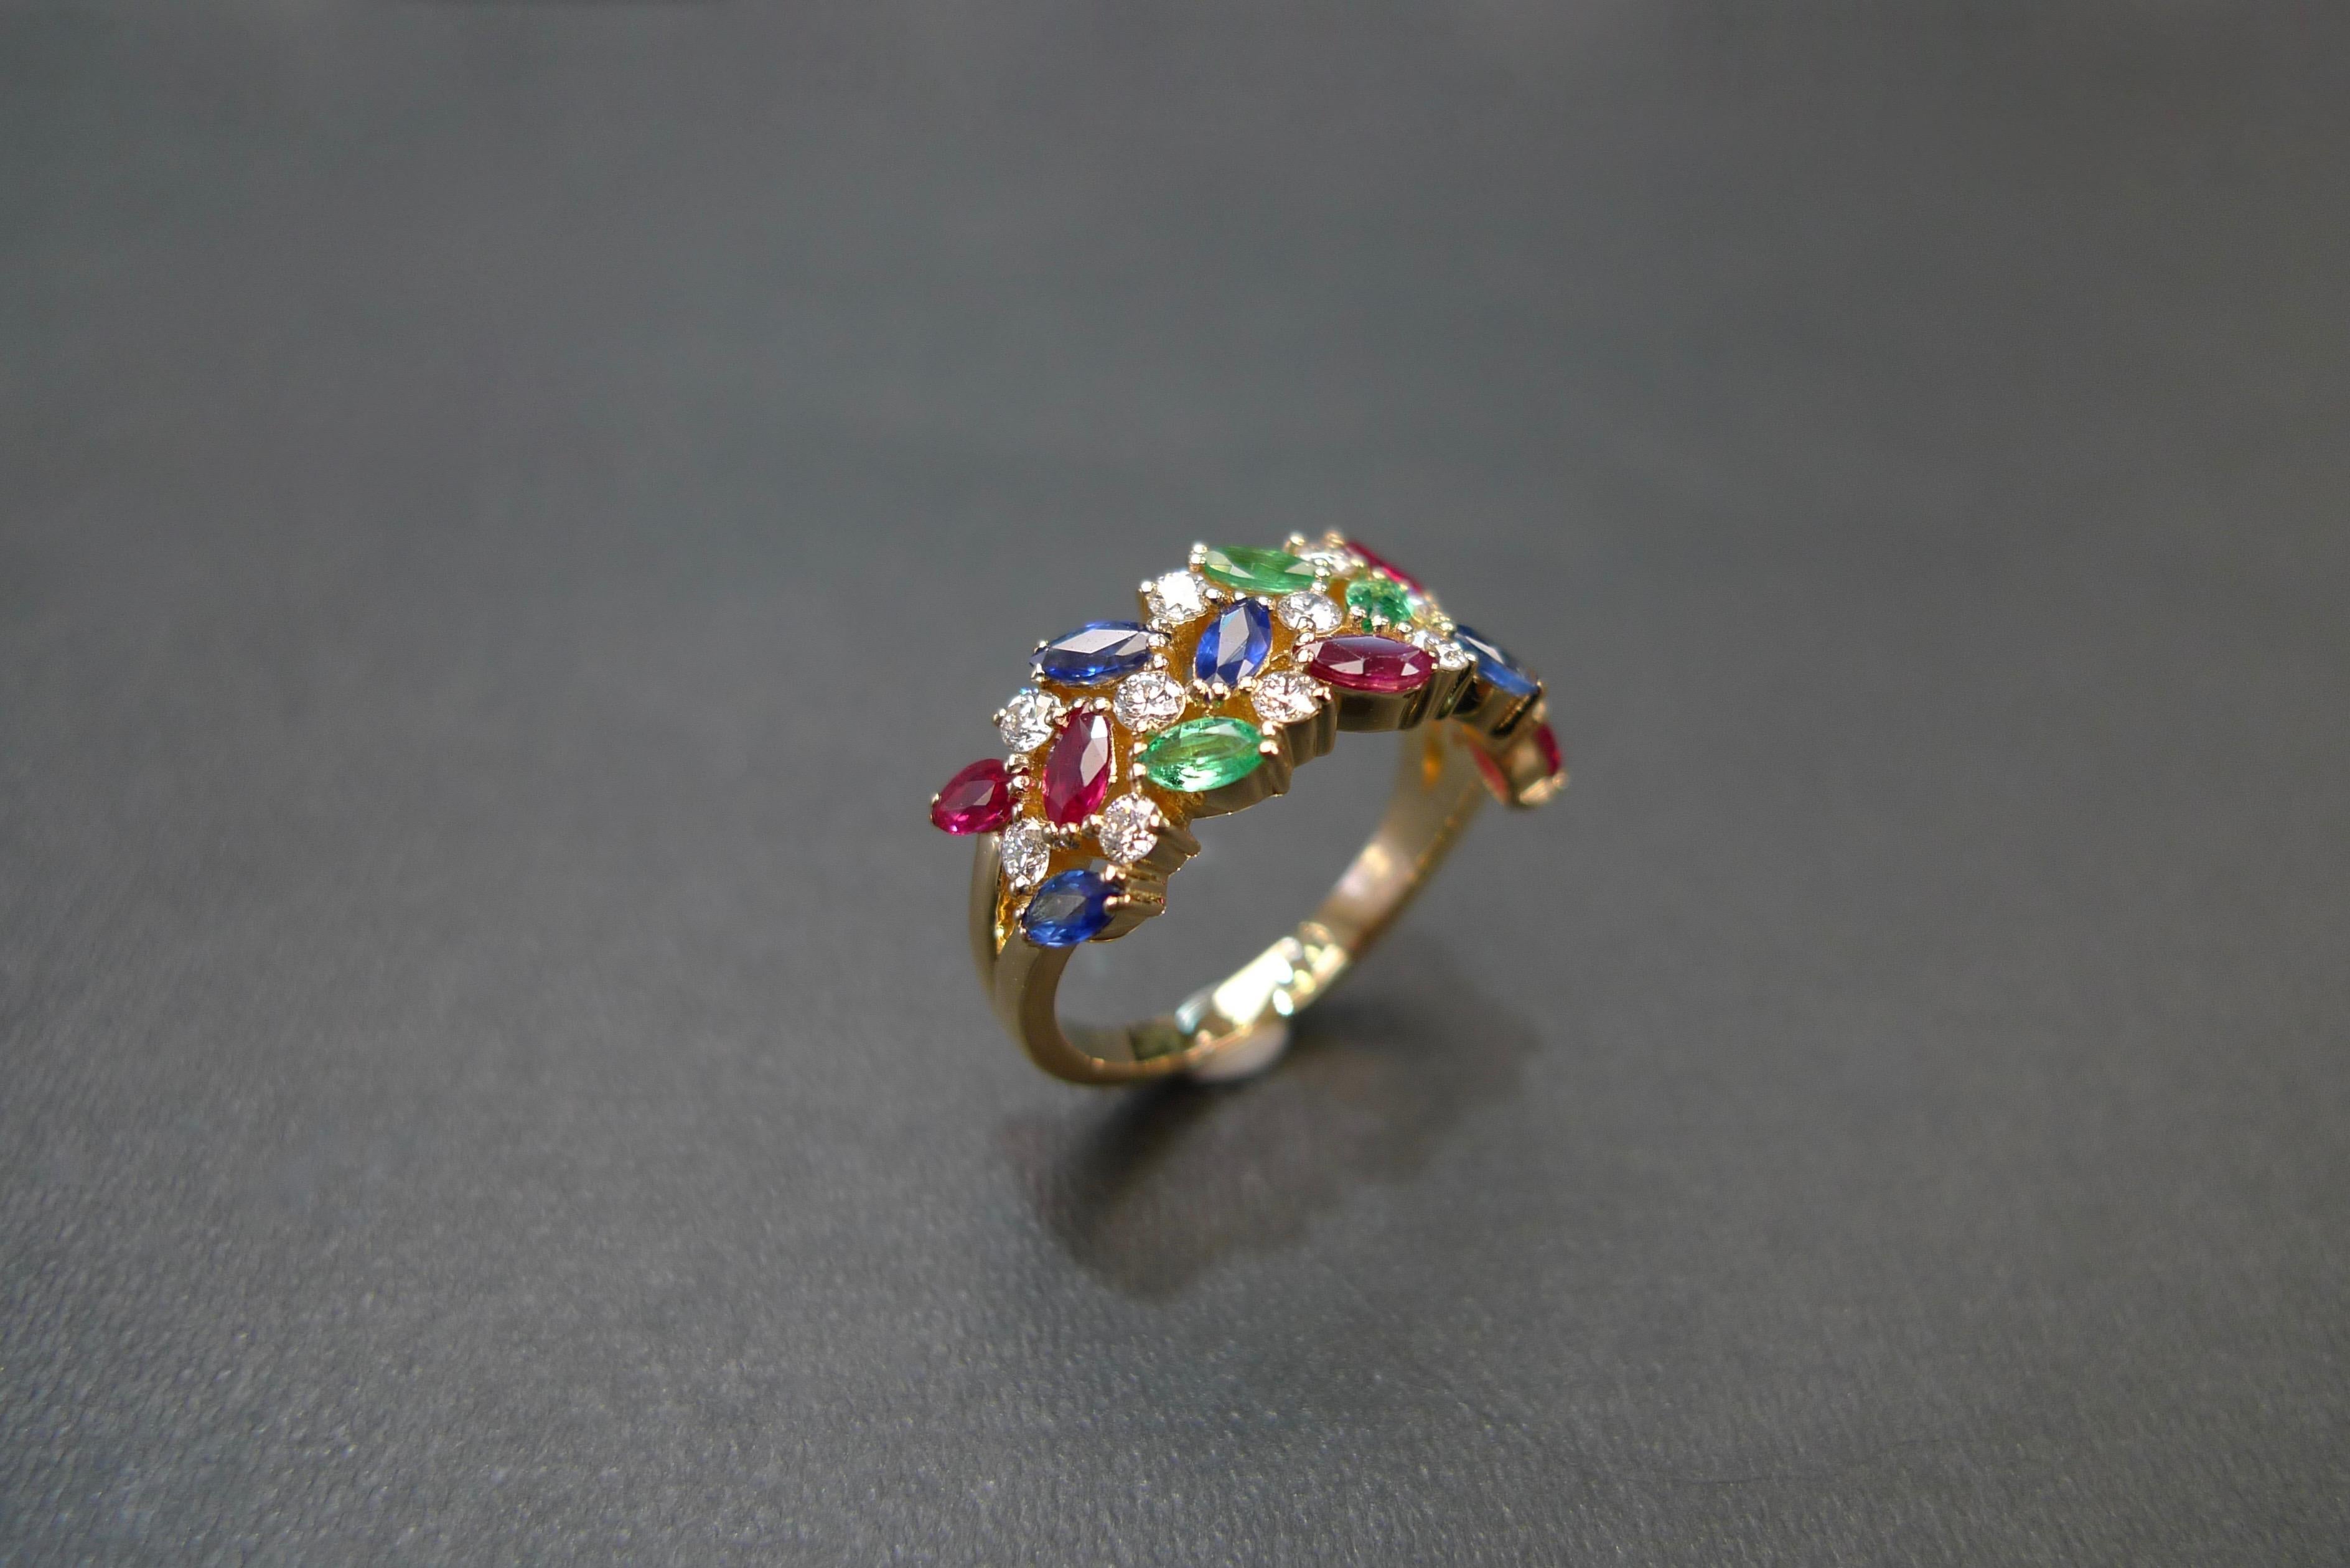 For Sale:  Vintage Style Wedding Ring Three Rows Blue Sapphire, Ruby, Emerald and Diamond  2